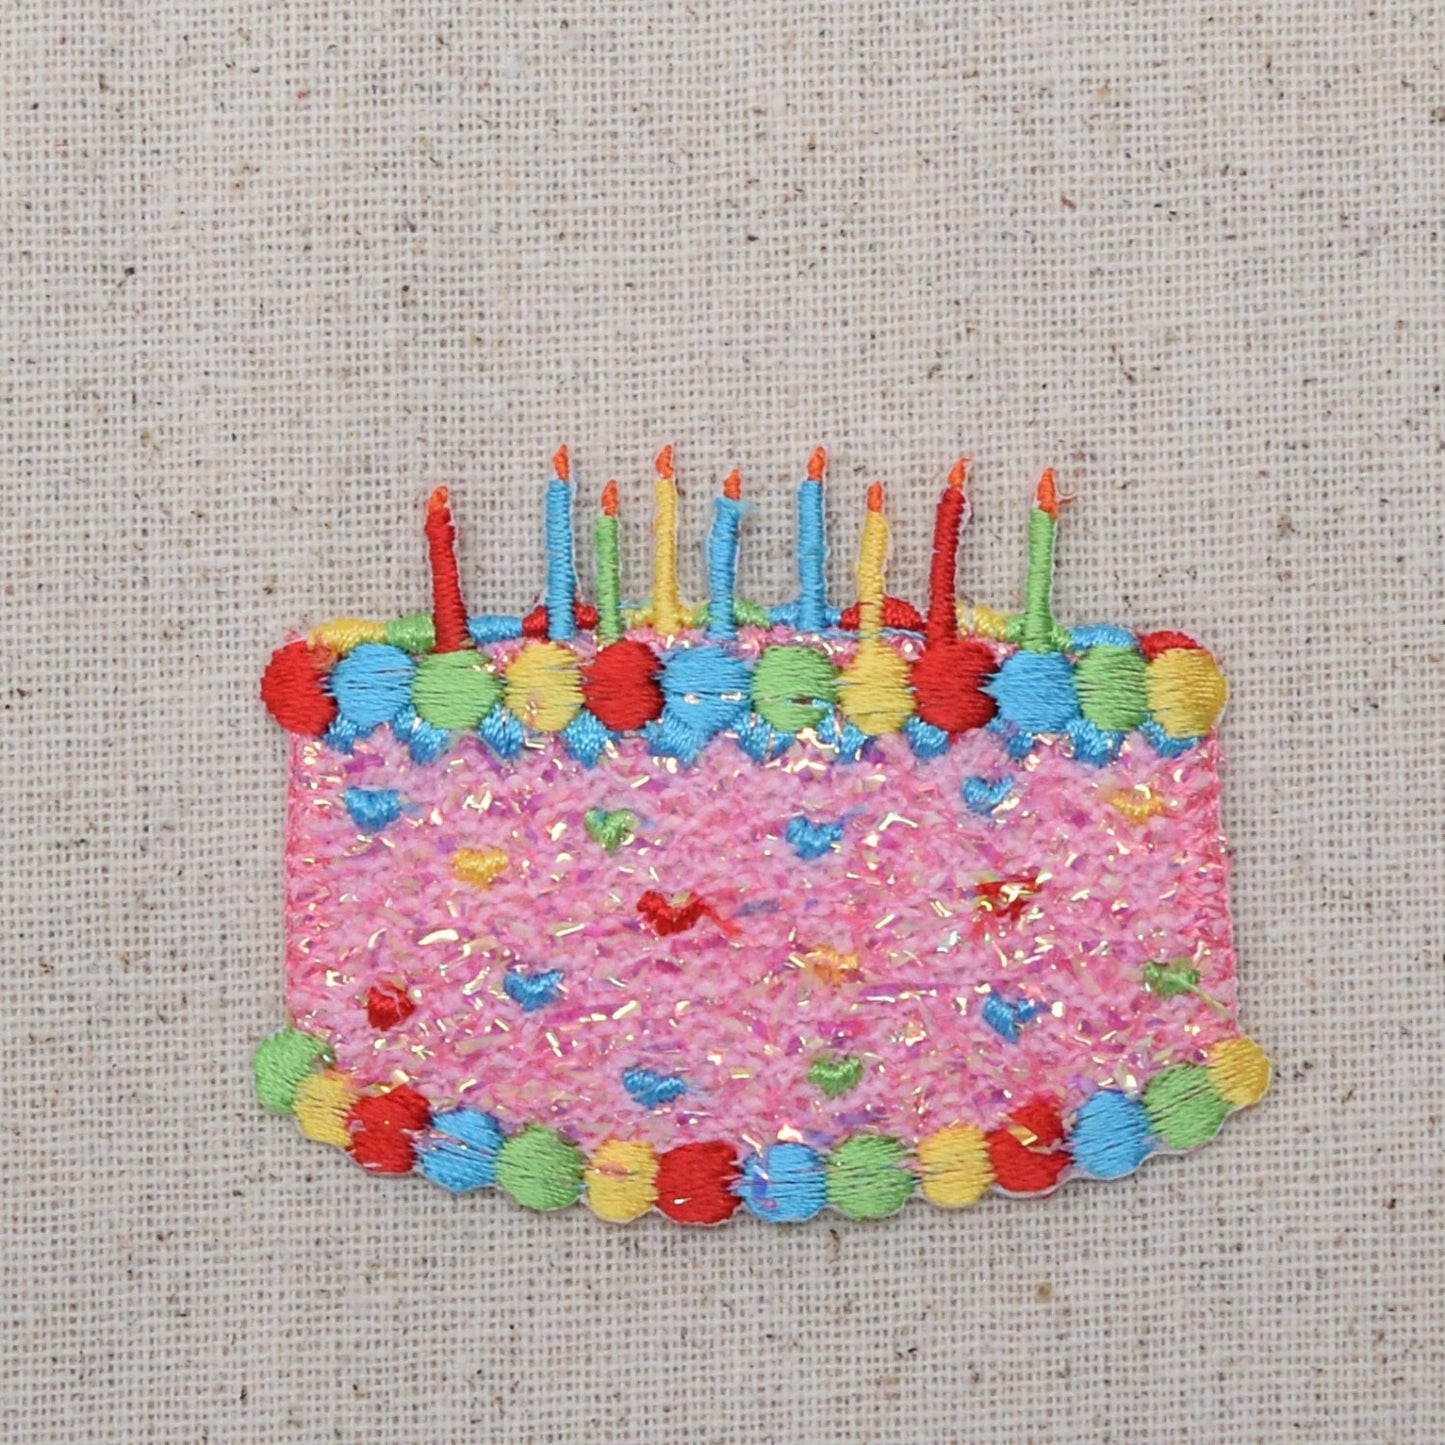 Birthday Cake with Candles - PINK or WHITE - Confetti Shimmery - Embroidered Patch - Iron on Applique - 694007